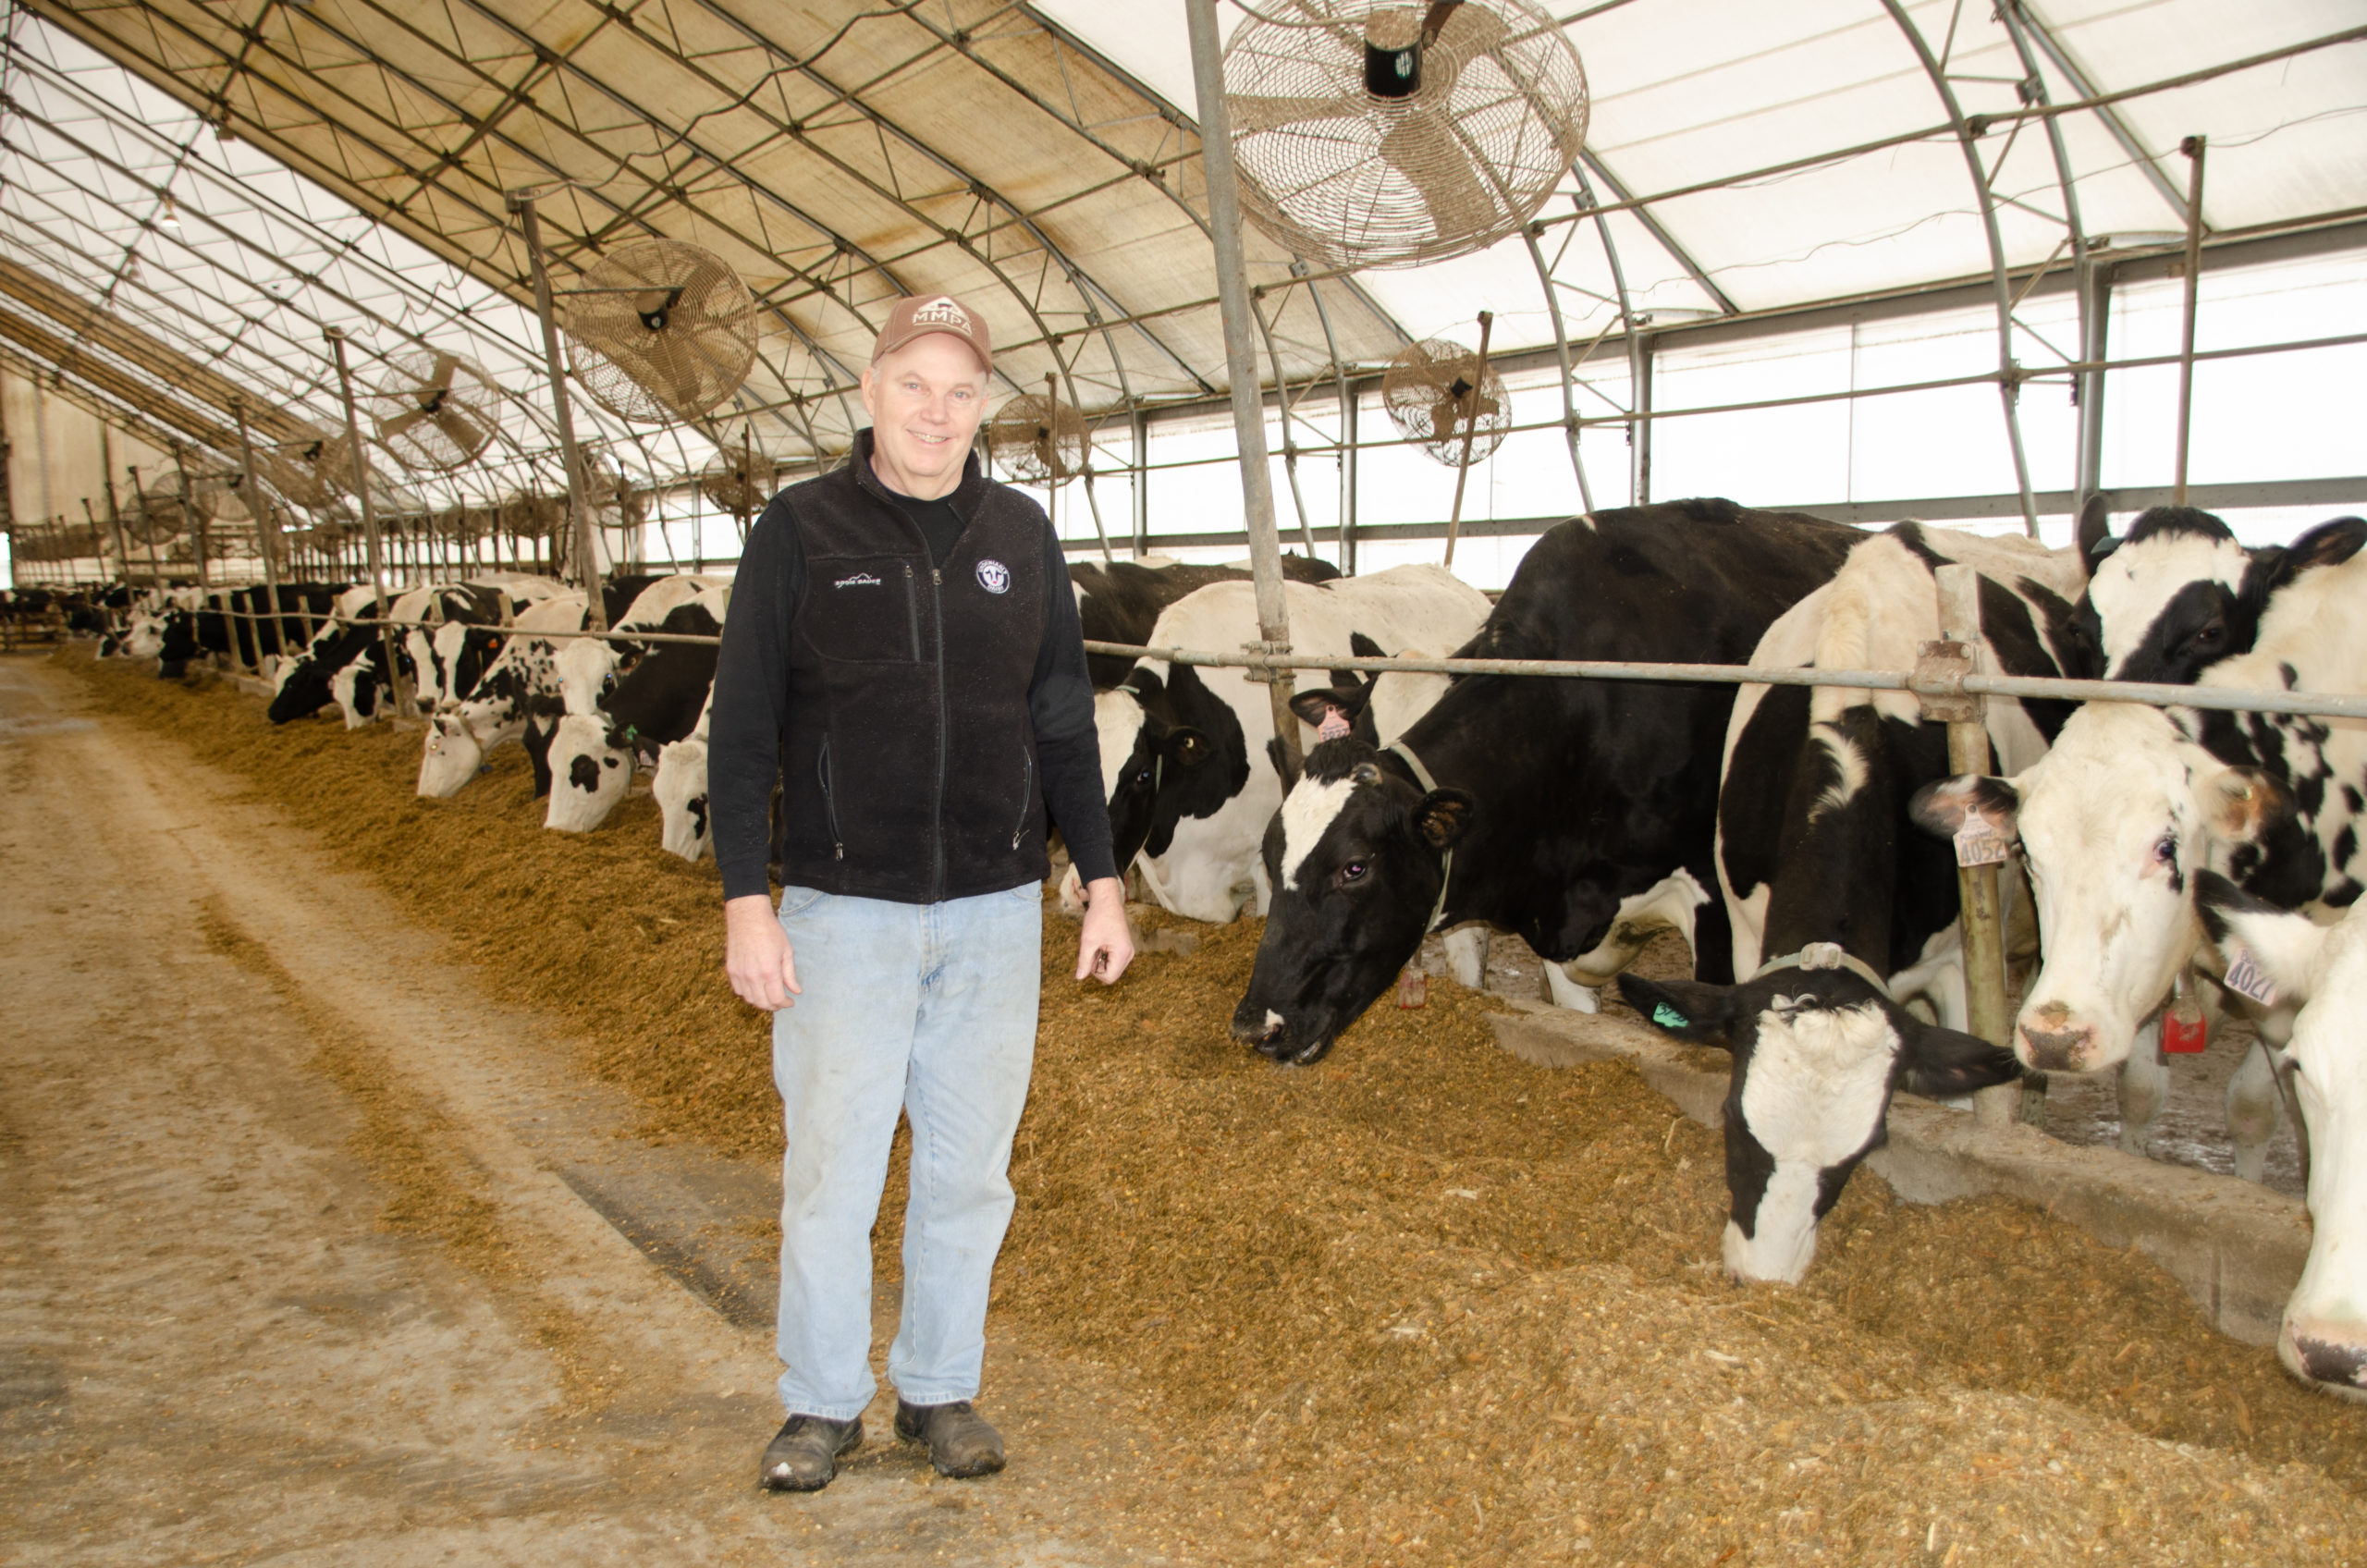 Tim Hood in front of his cows. Part of a farming commitment.